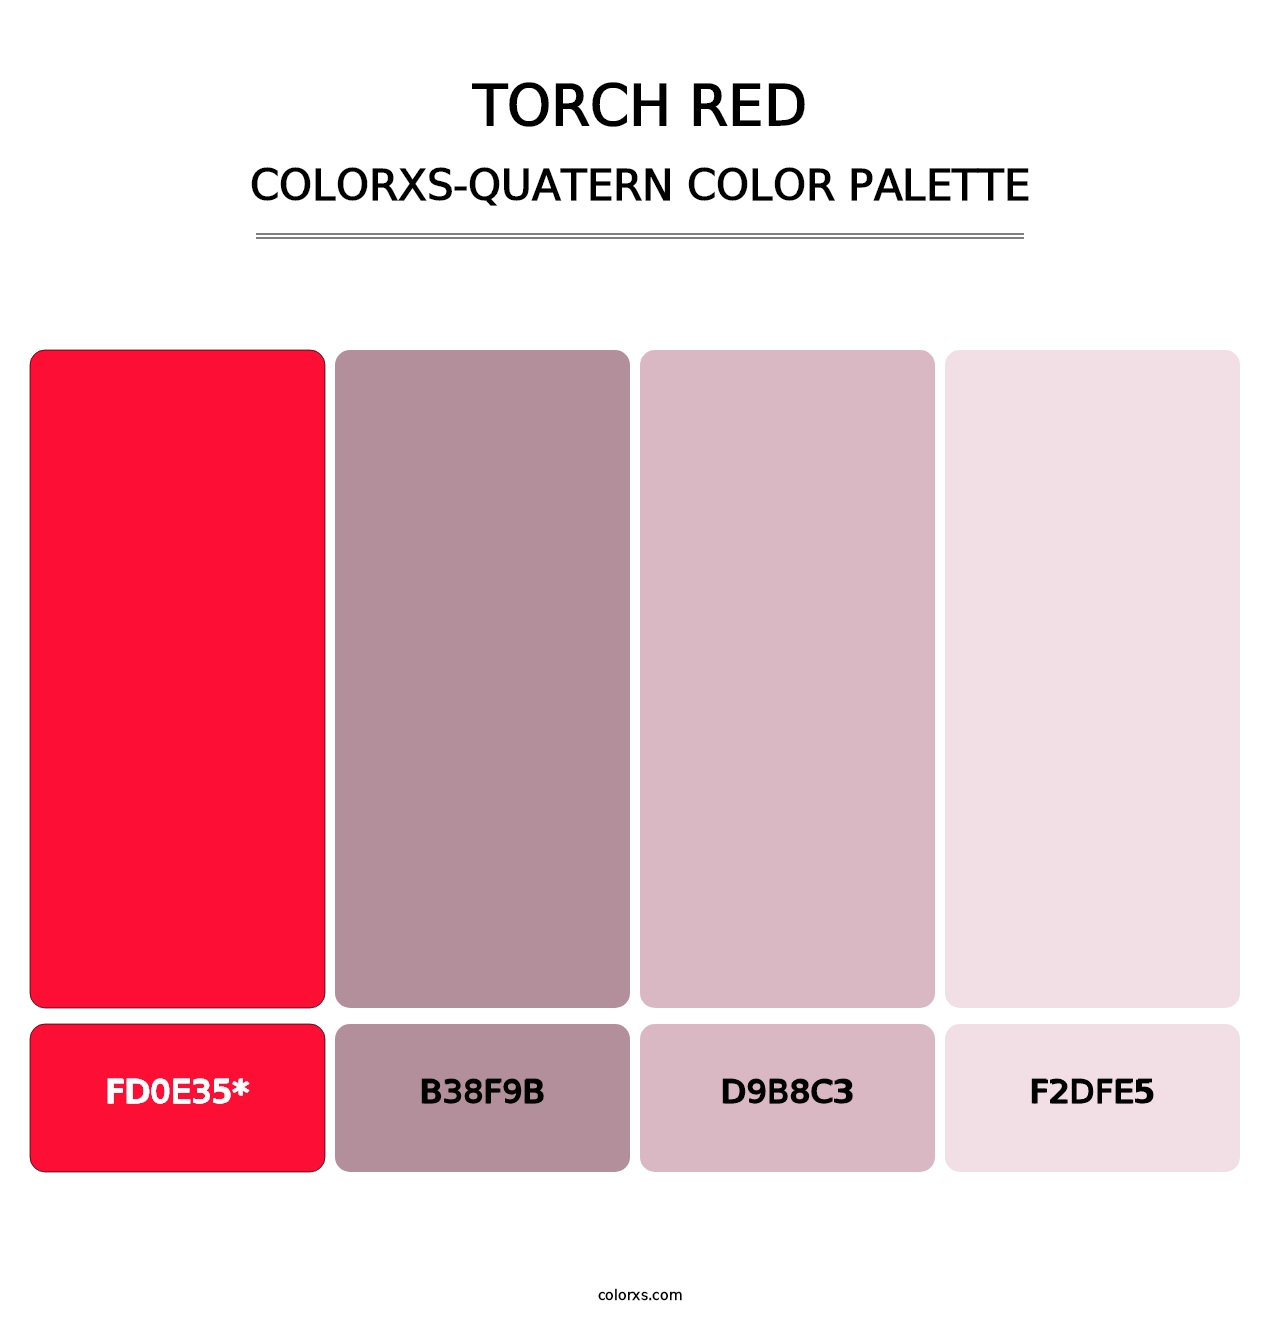 Torch Red - Colorxs Quatern Palette